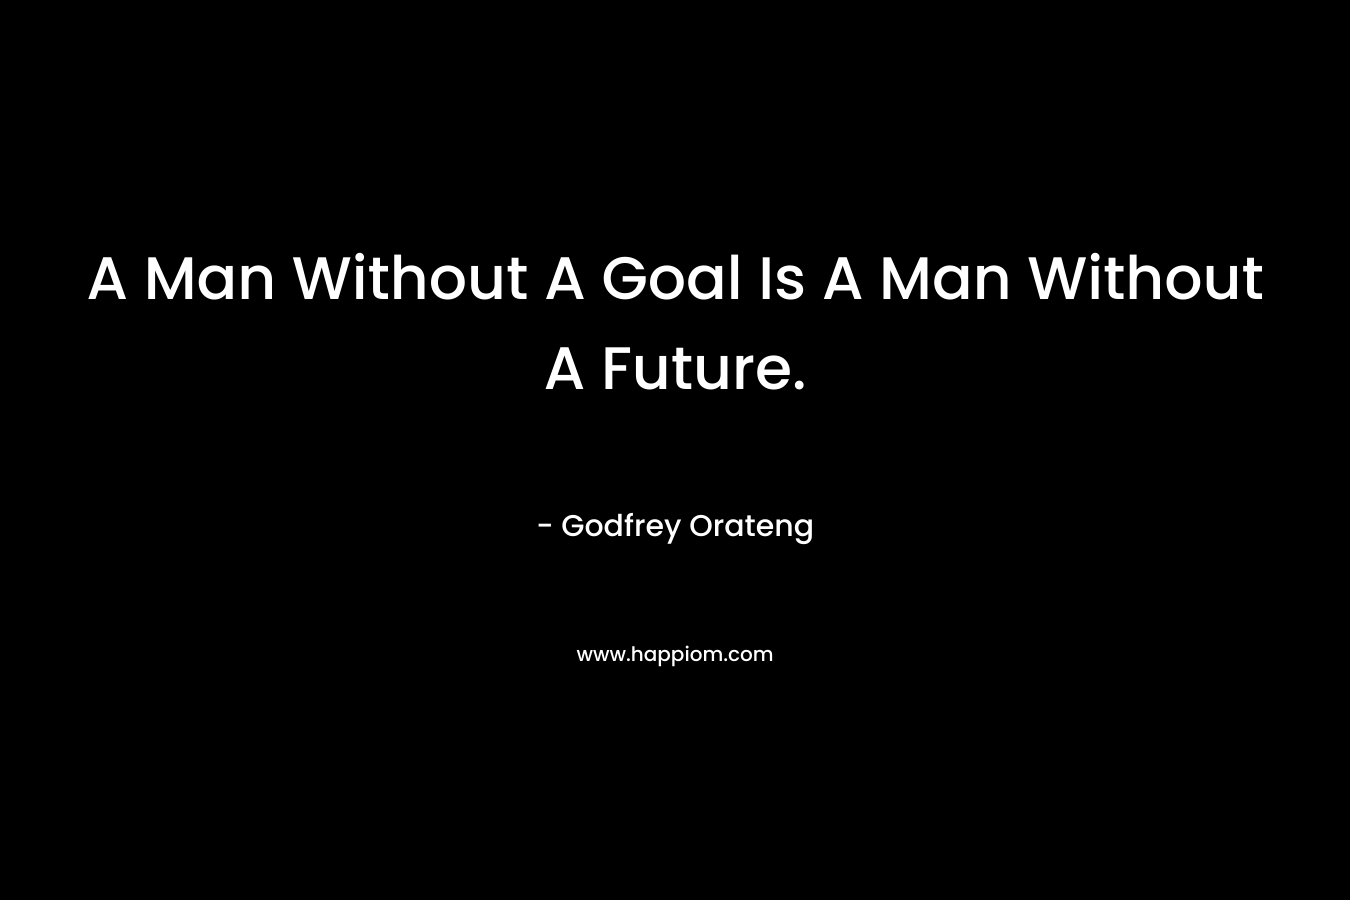 A Man Without A Goal Is A Man Without A Future.